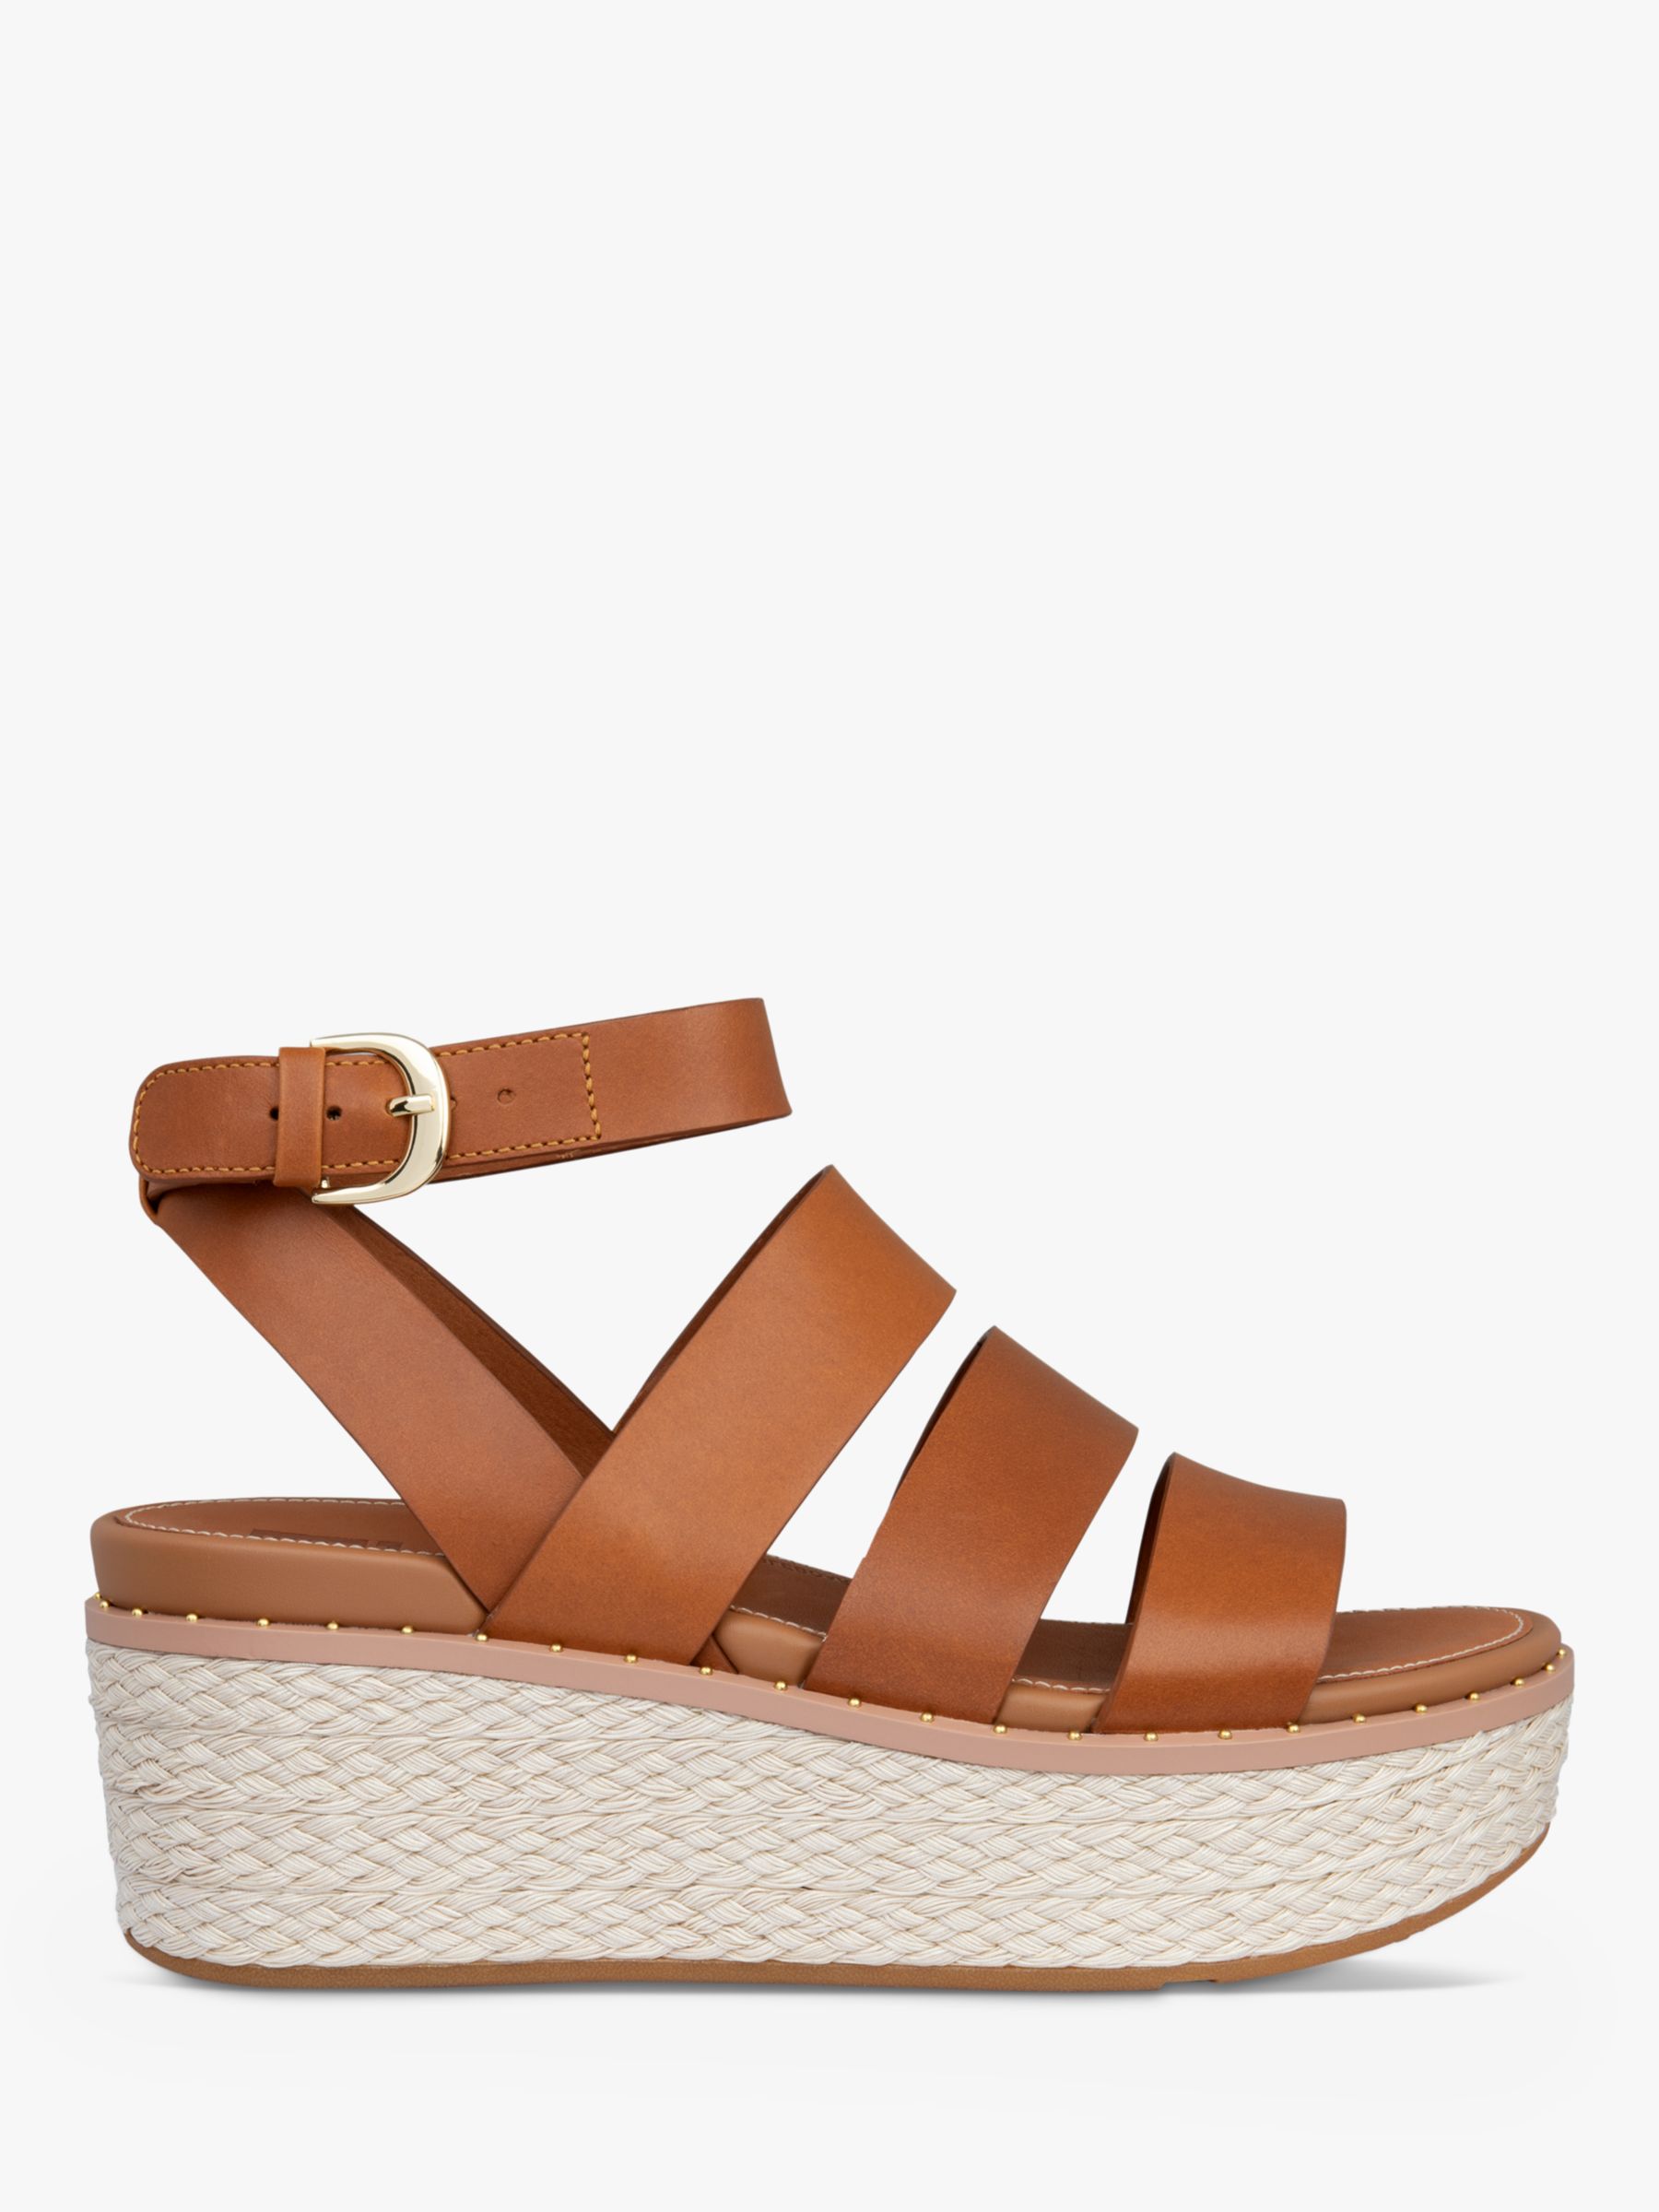 FitFlop Eloise Strappy Leather Wedge Sandals, Natural at John Lewis ...